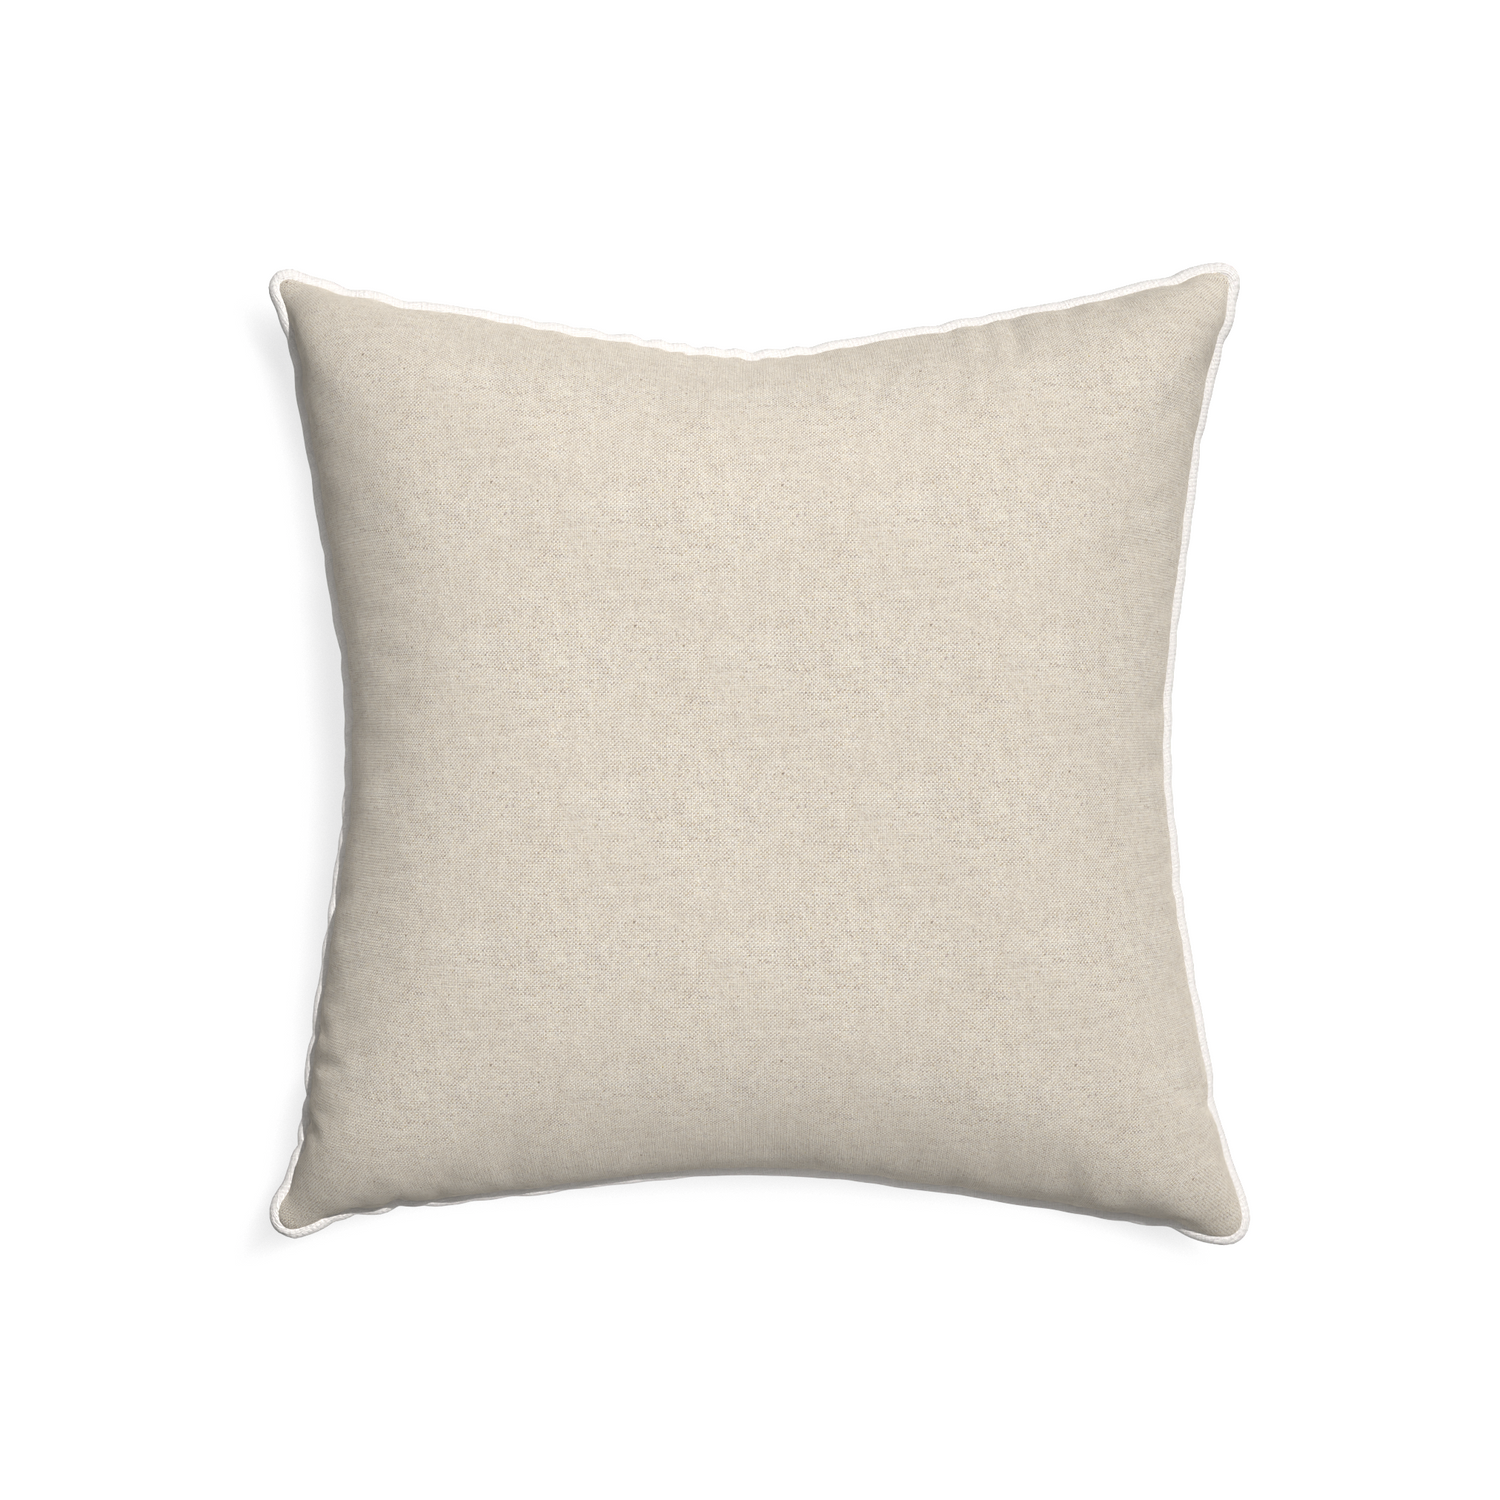 22-square oat custom light brownpillow with snow piping on white background